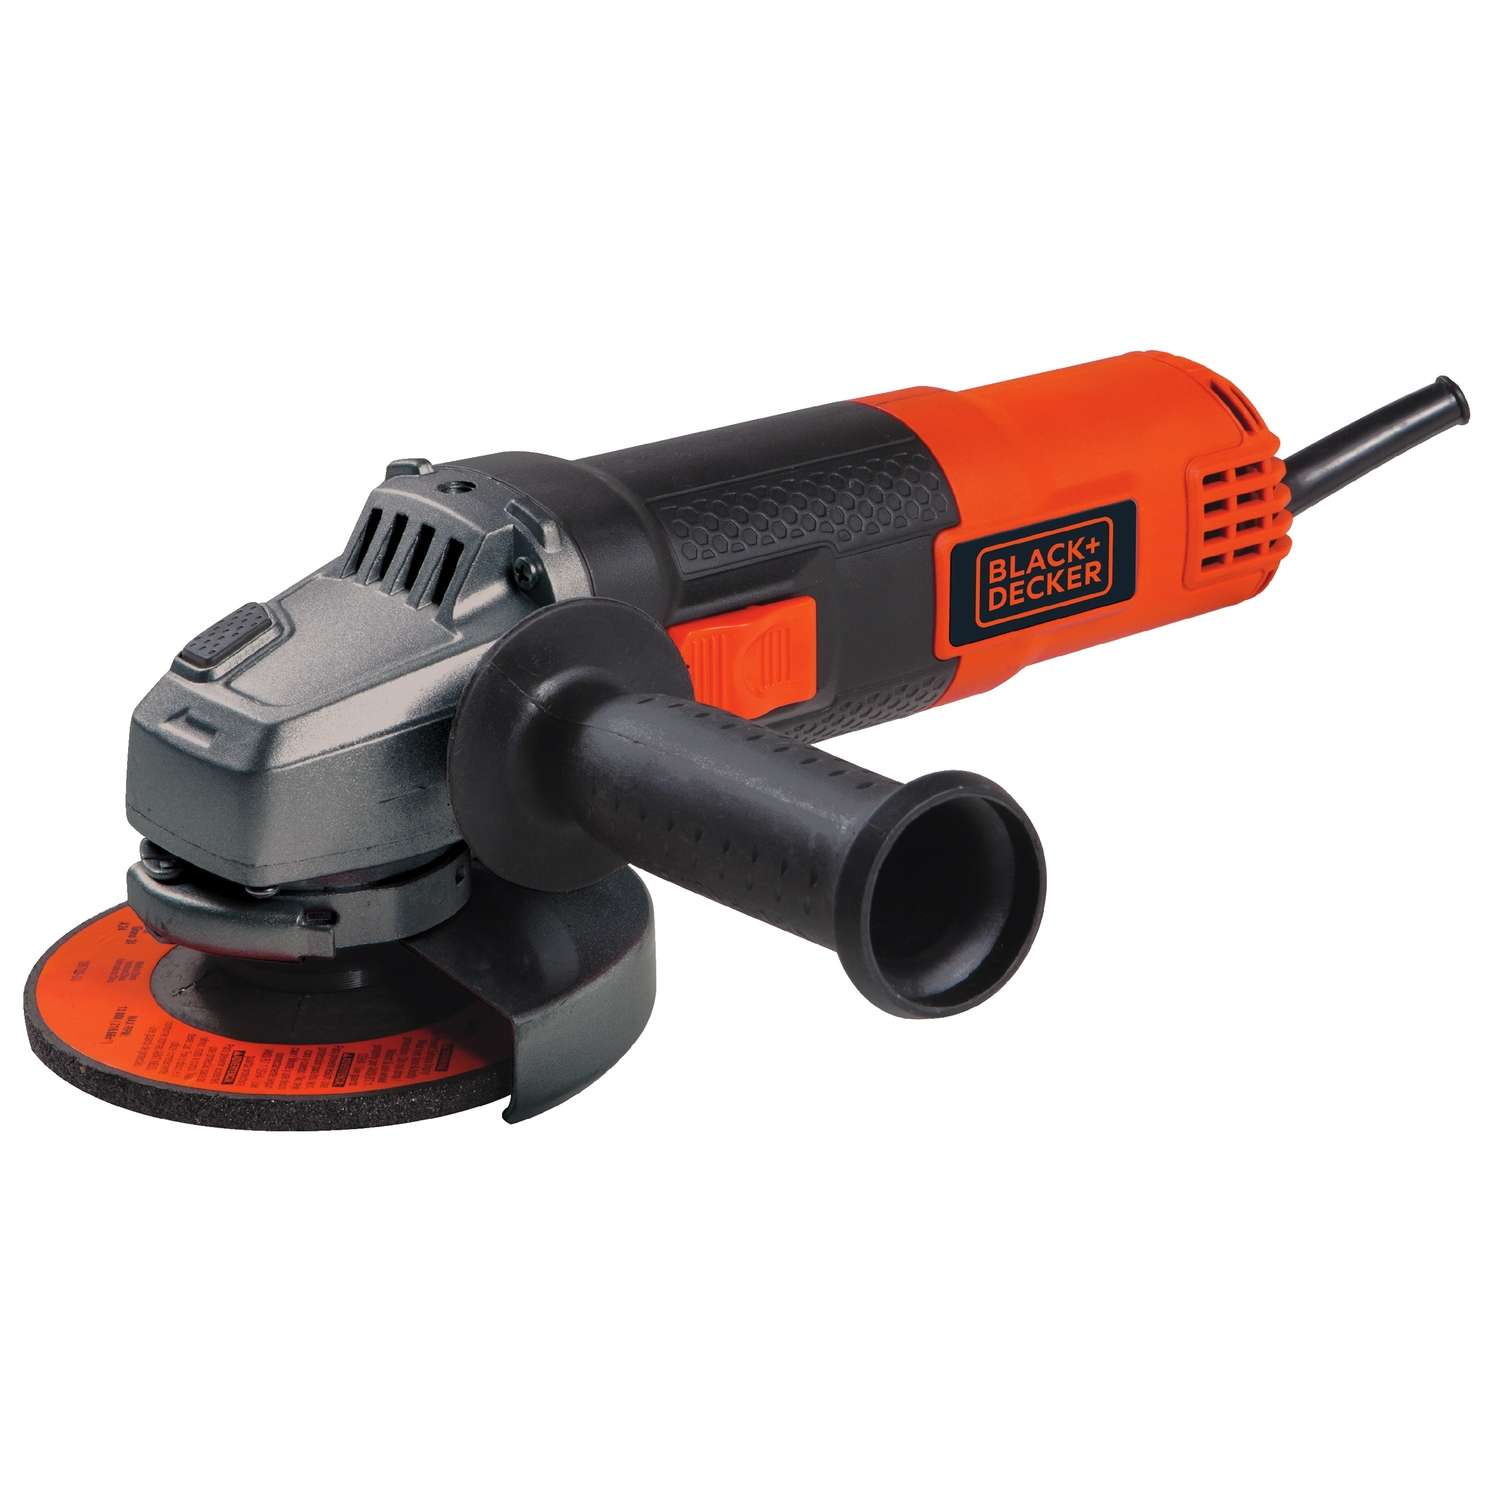 Black and Decker Corded 6 5 amps 4 1 2 in Small Angle 